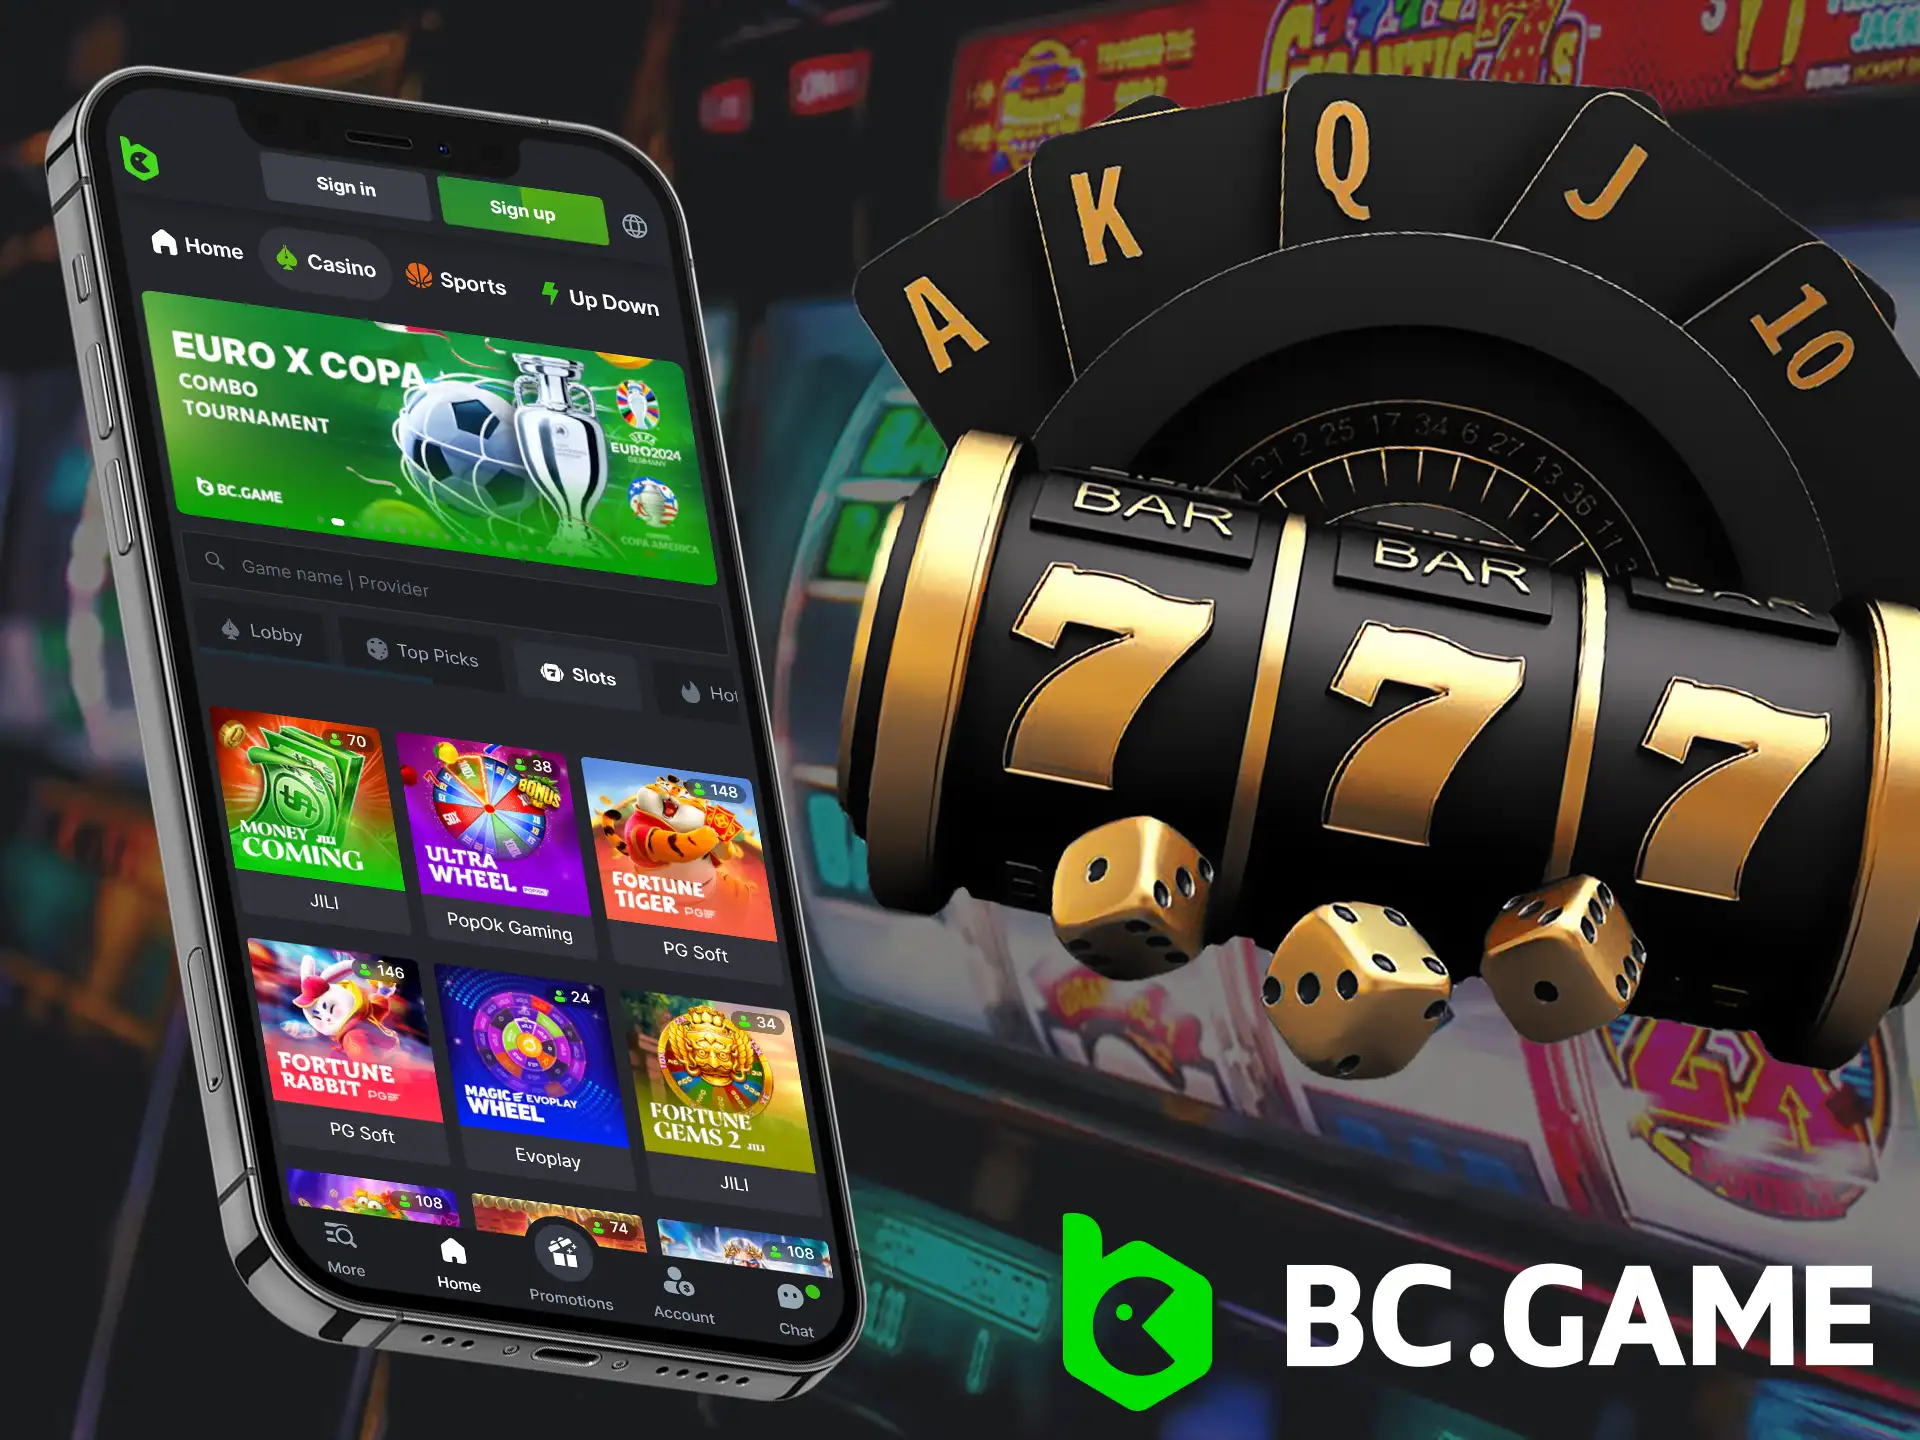 Play slot machines using the BC.Game app.